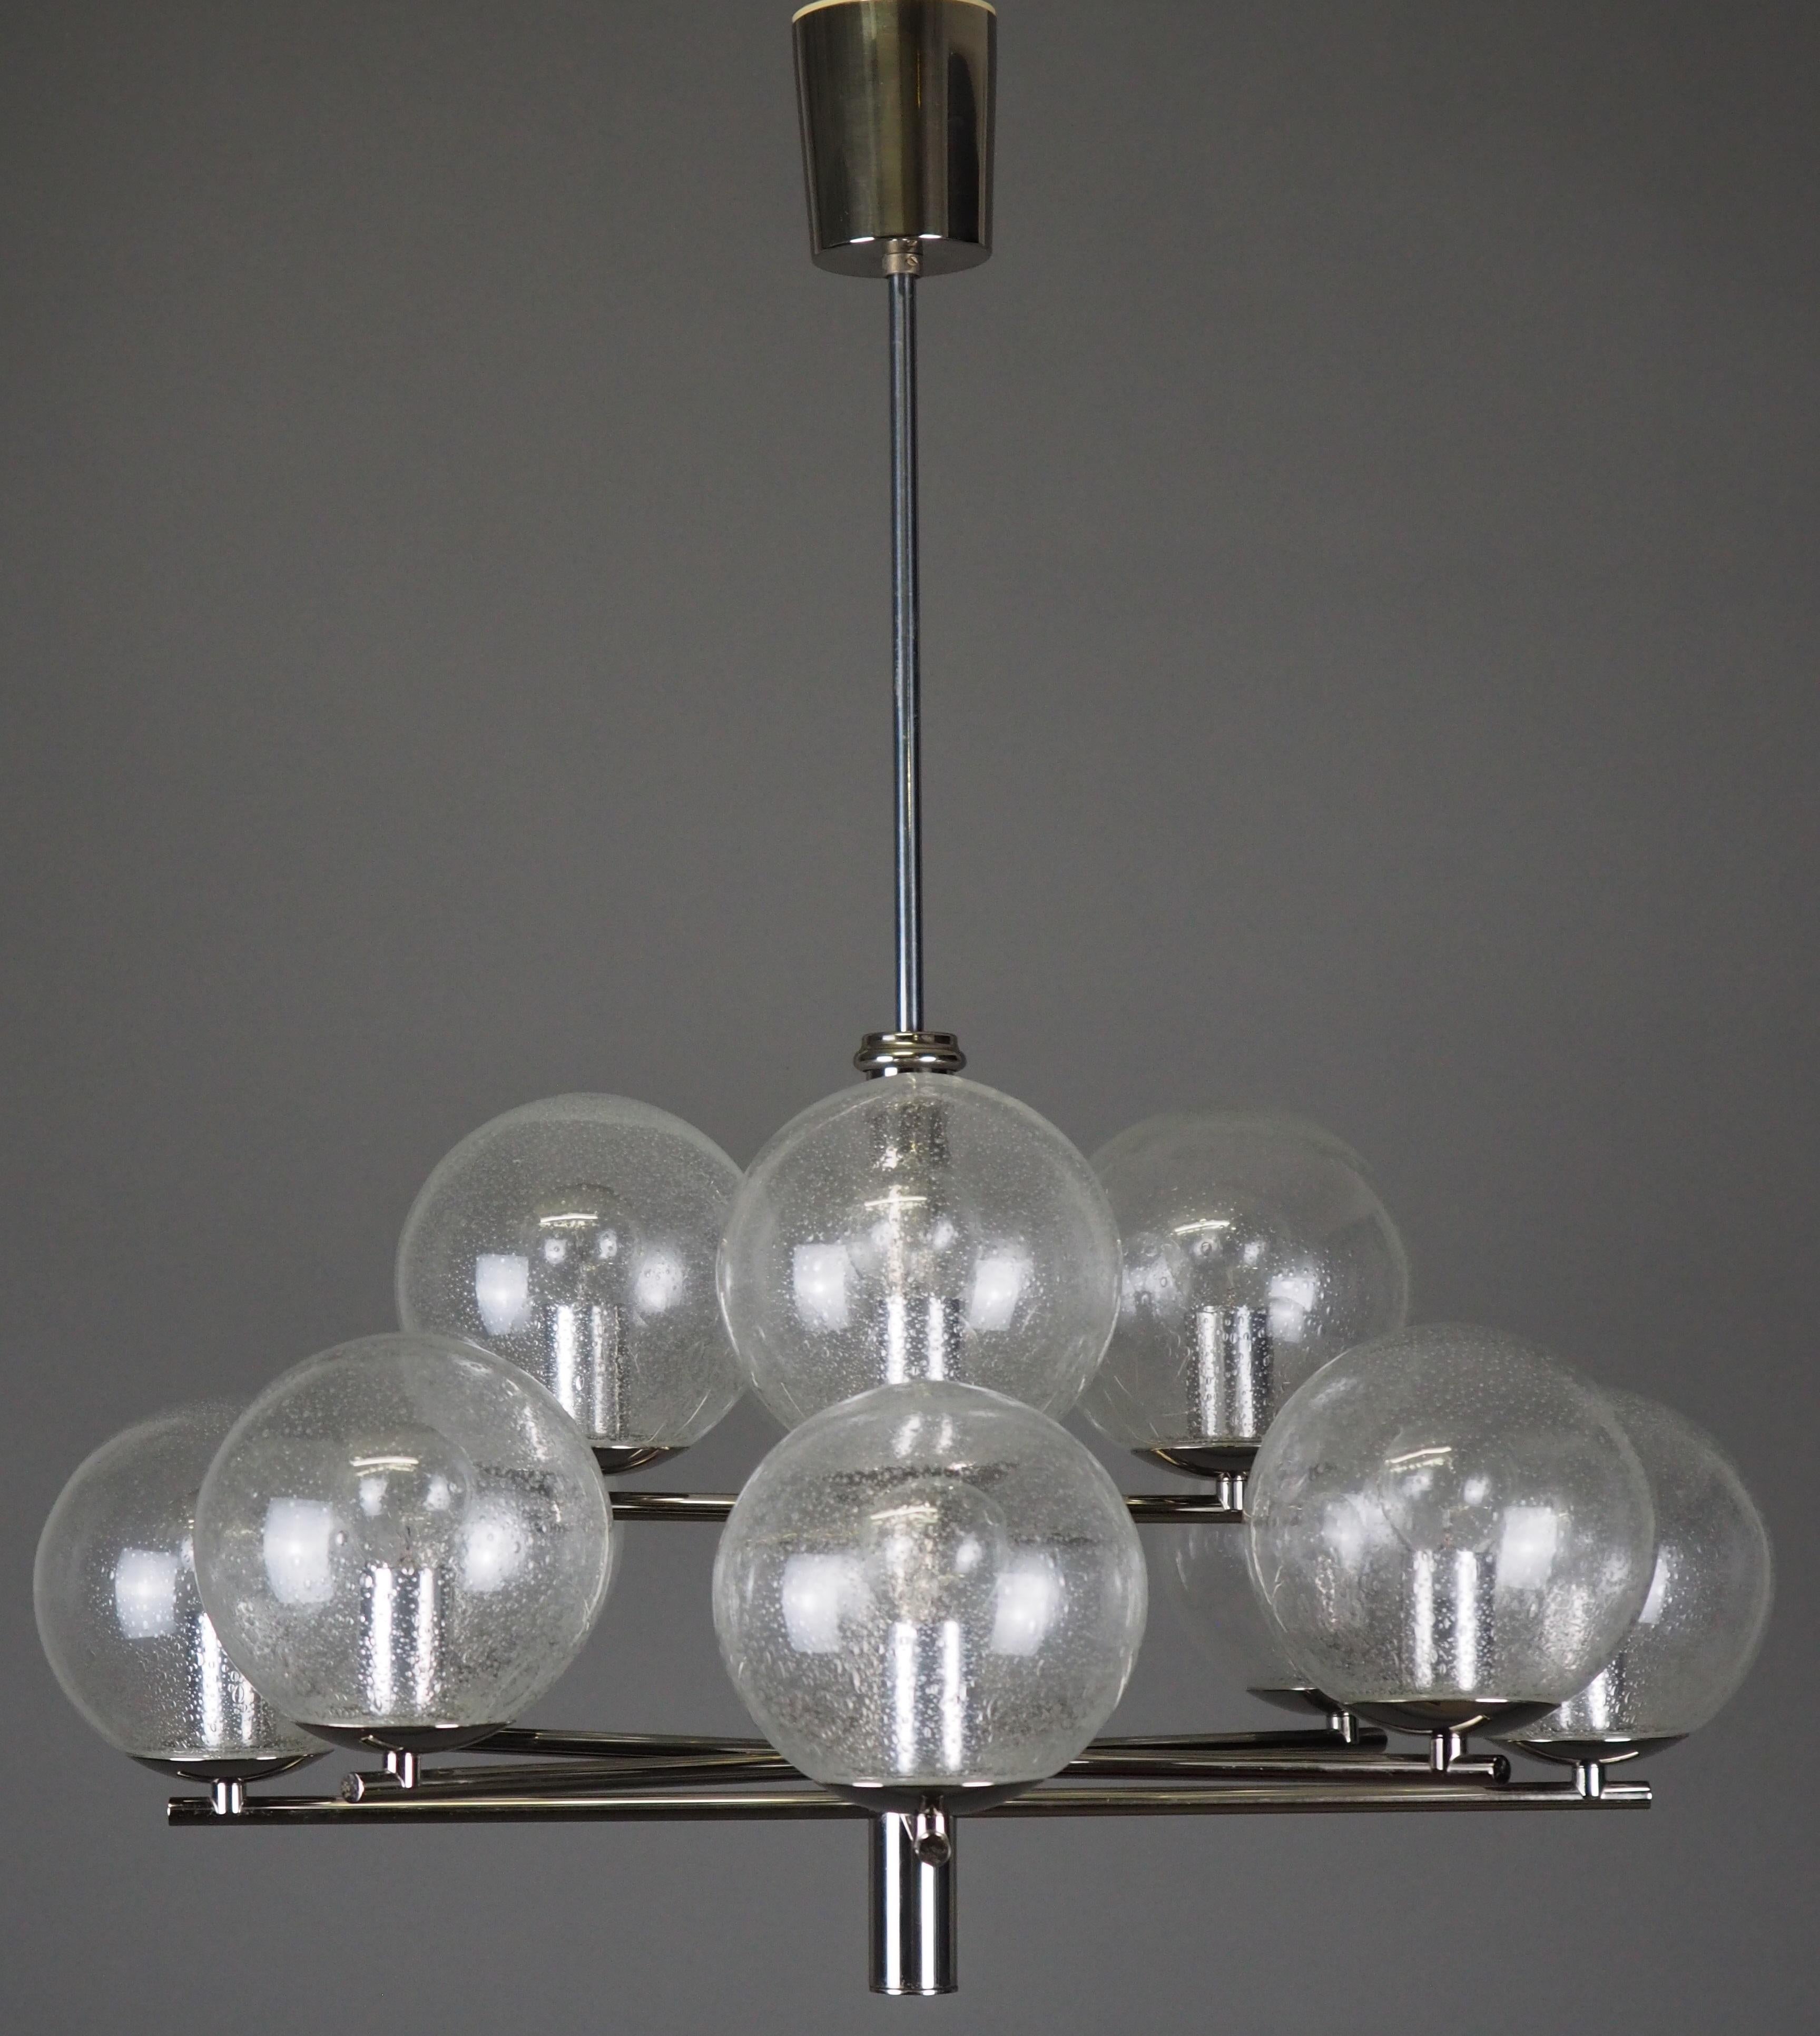 A Mid-Century Modern twelve-light glass globe pendant by Glashütte Limburg, Germany, circa 1970s.
This chandelier is made of nickeled brass and twelve blown glass globes.
Socket: 12 x (E14) for standard screw bulb.
Rewired for US standards,
The